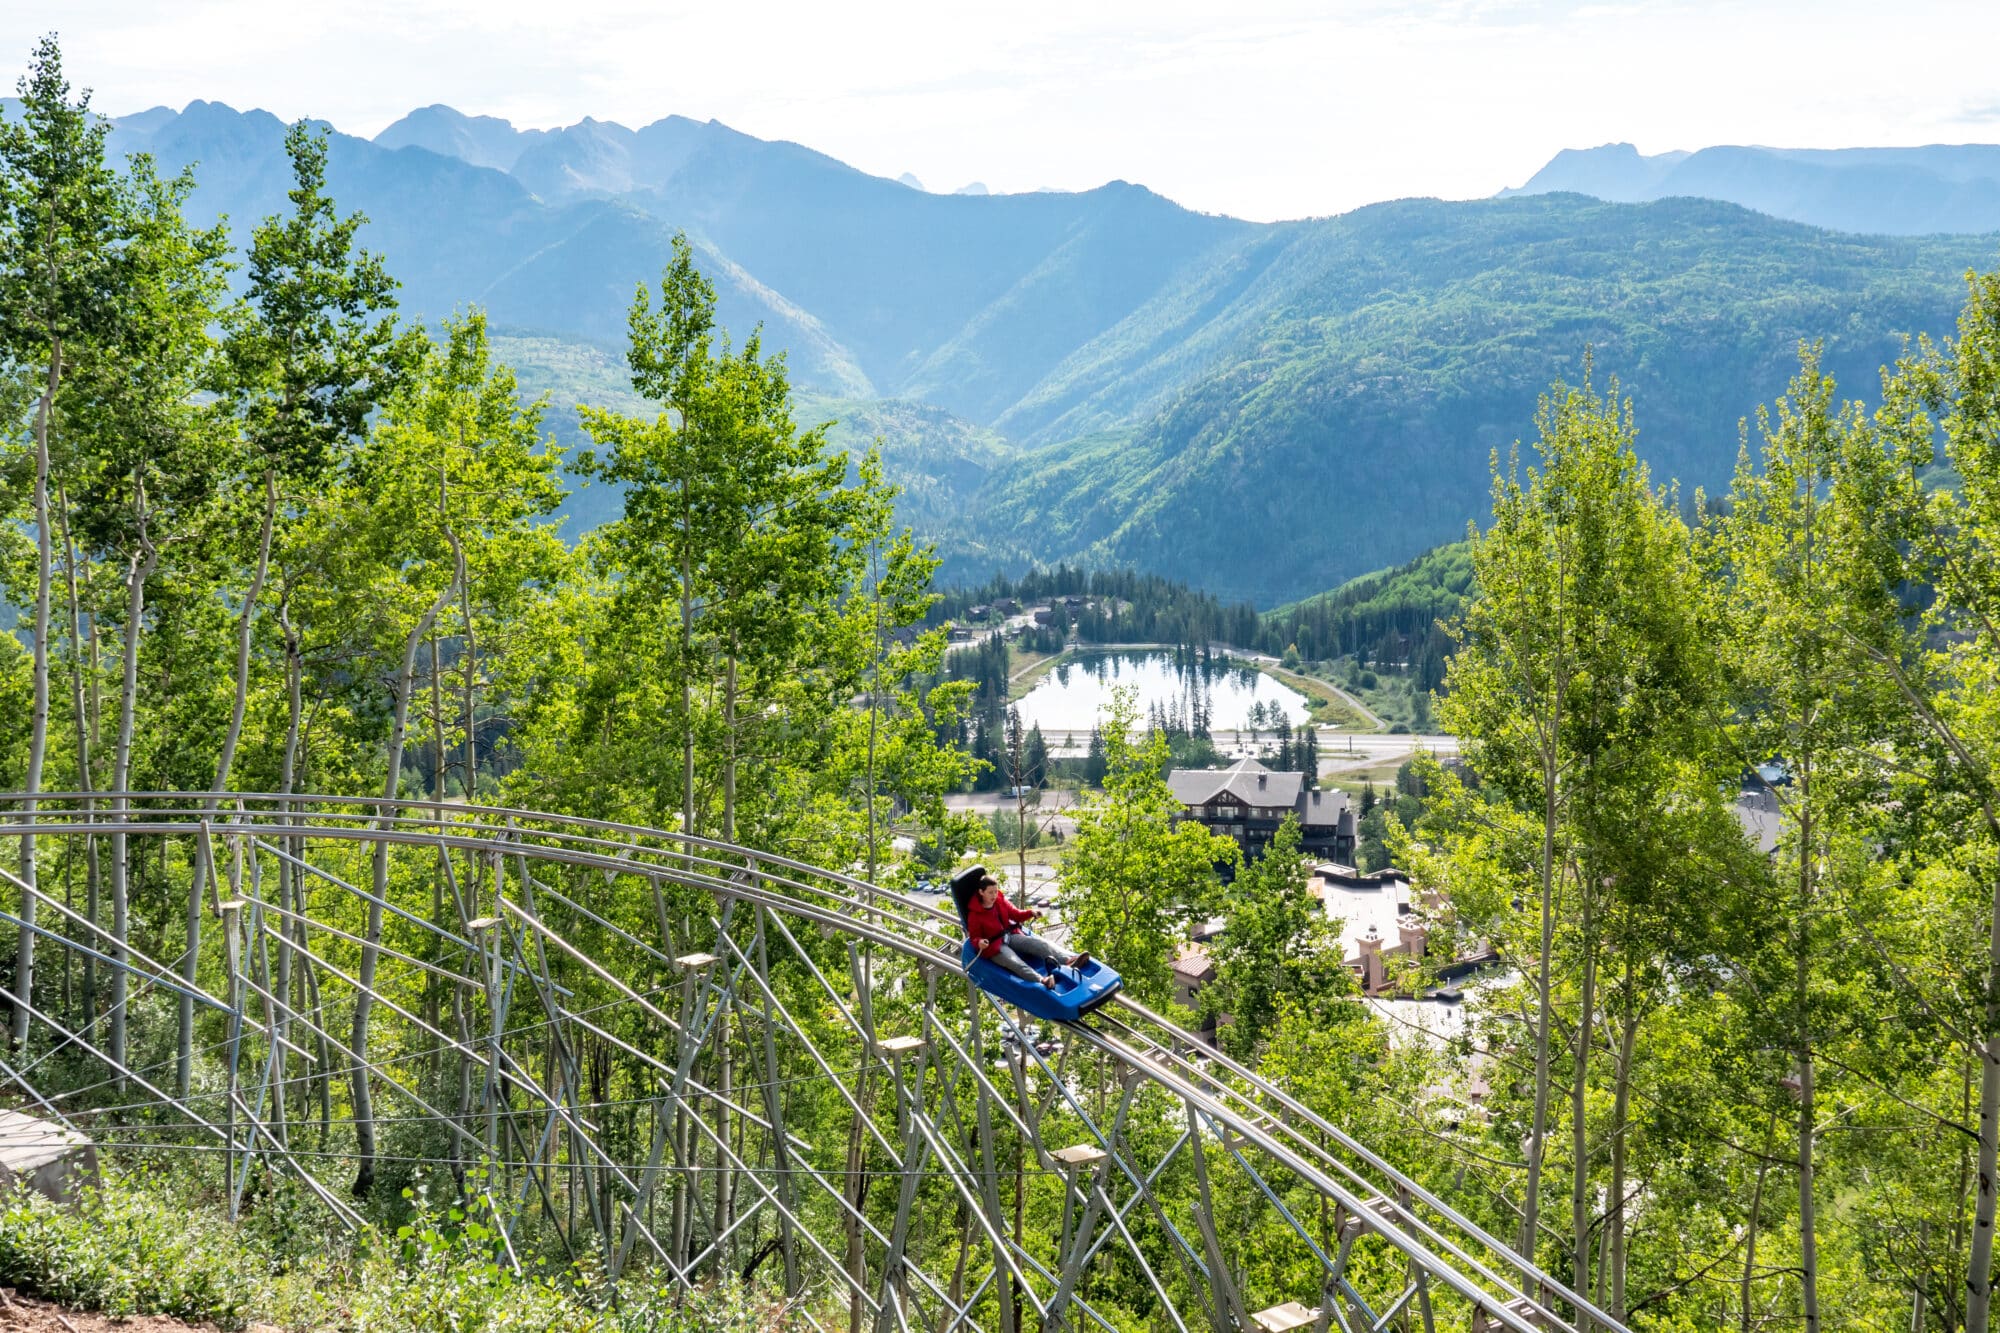 The mountain coaster in summer with mountains in the background